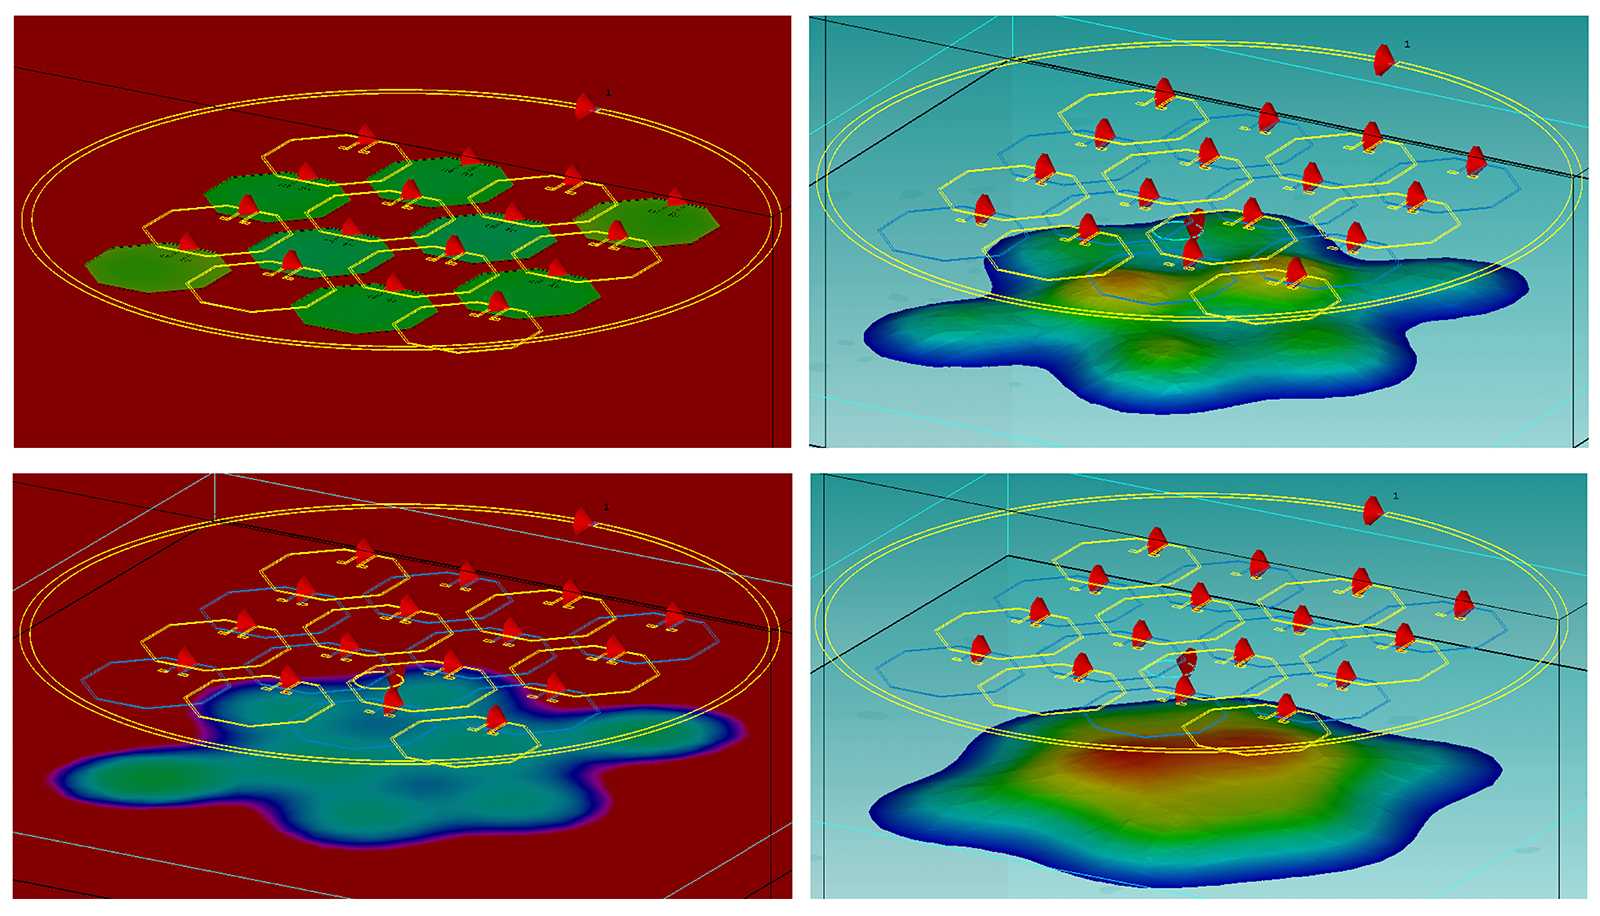 Phase images at two different depths (left) and magnitude images of the magnetic field (right) for different resonance patterns in a metamaterial array.